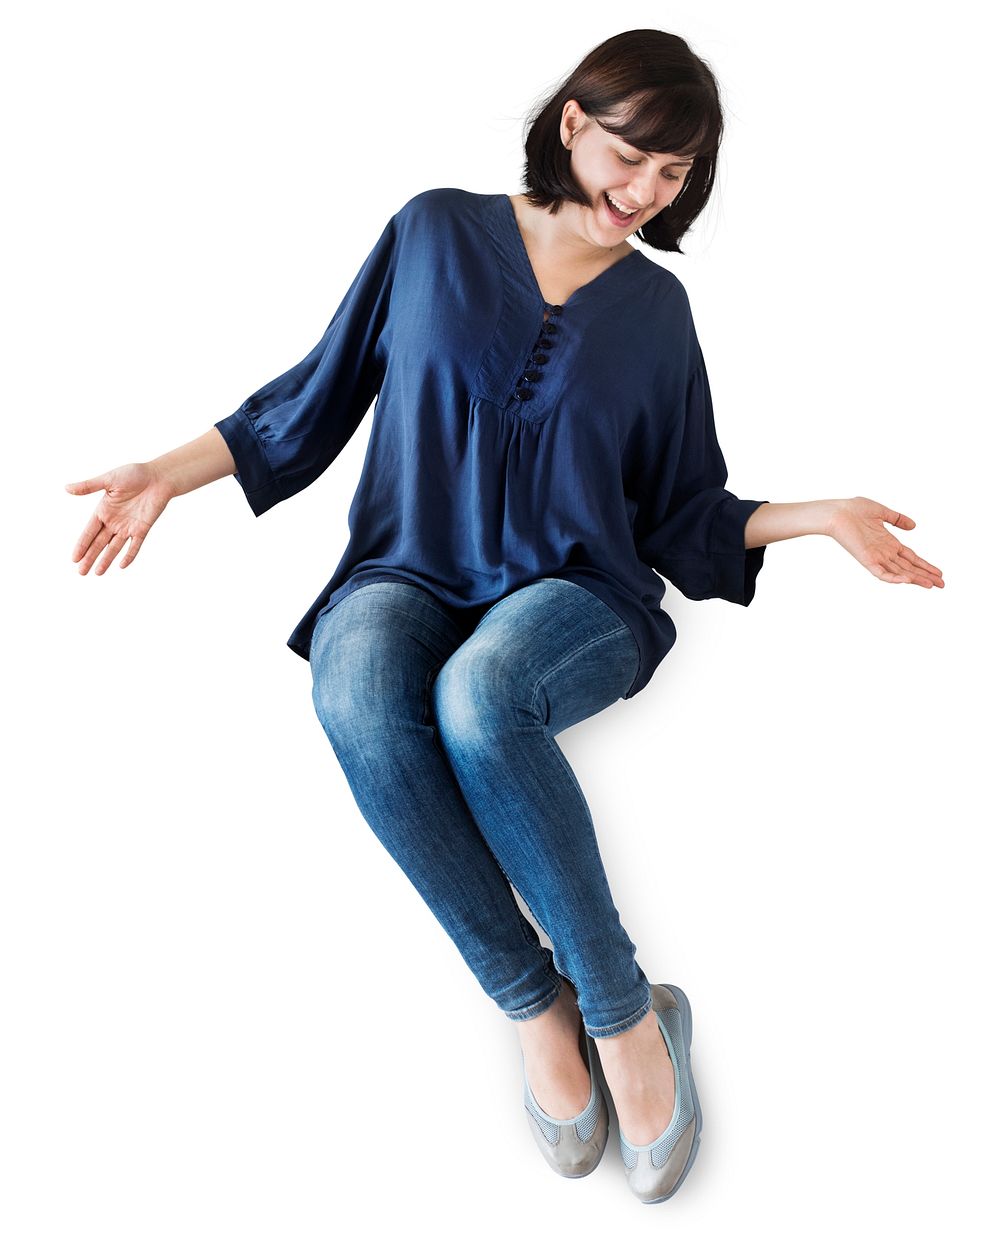 Isolated happy and cheerful woman sitting